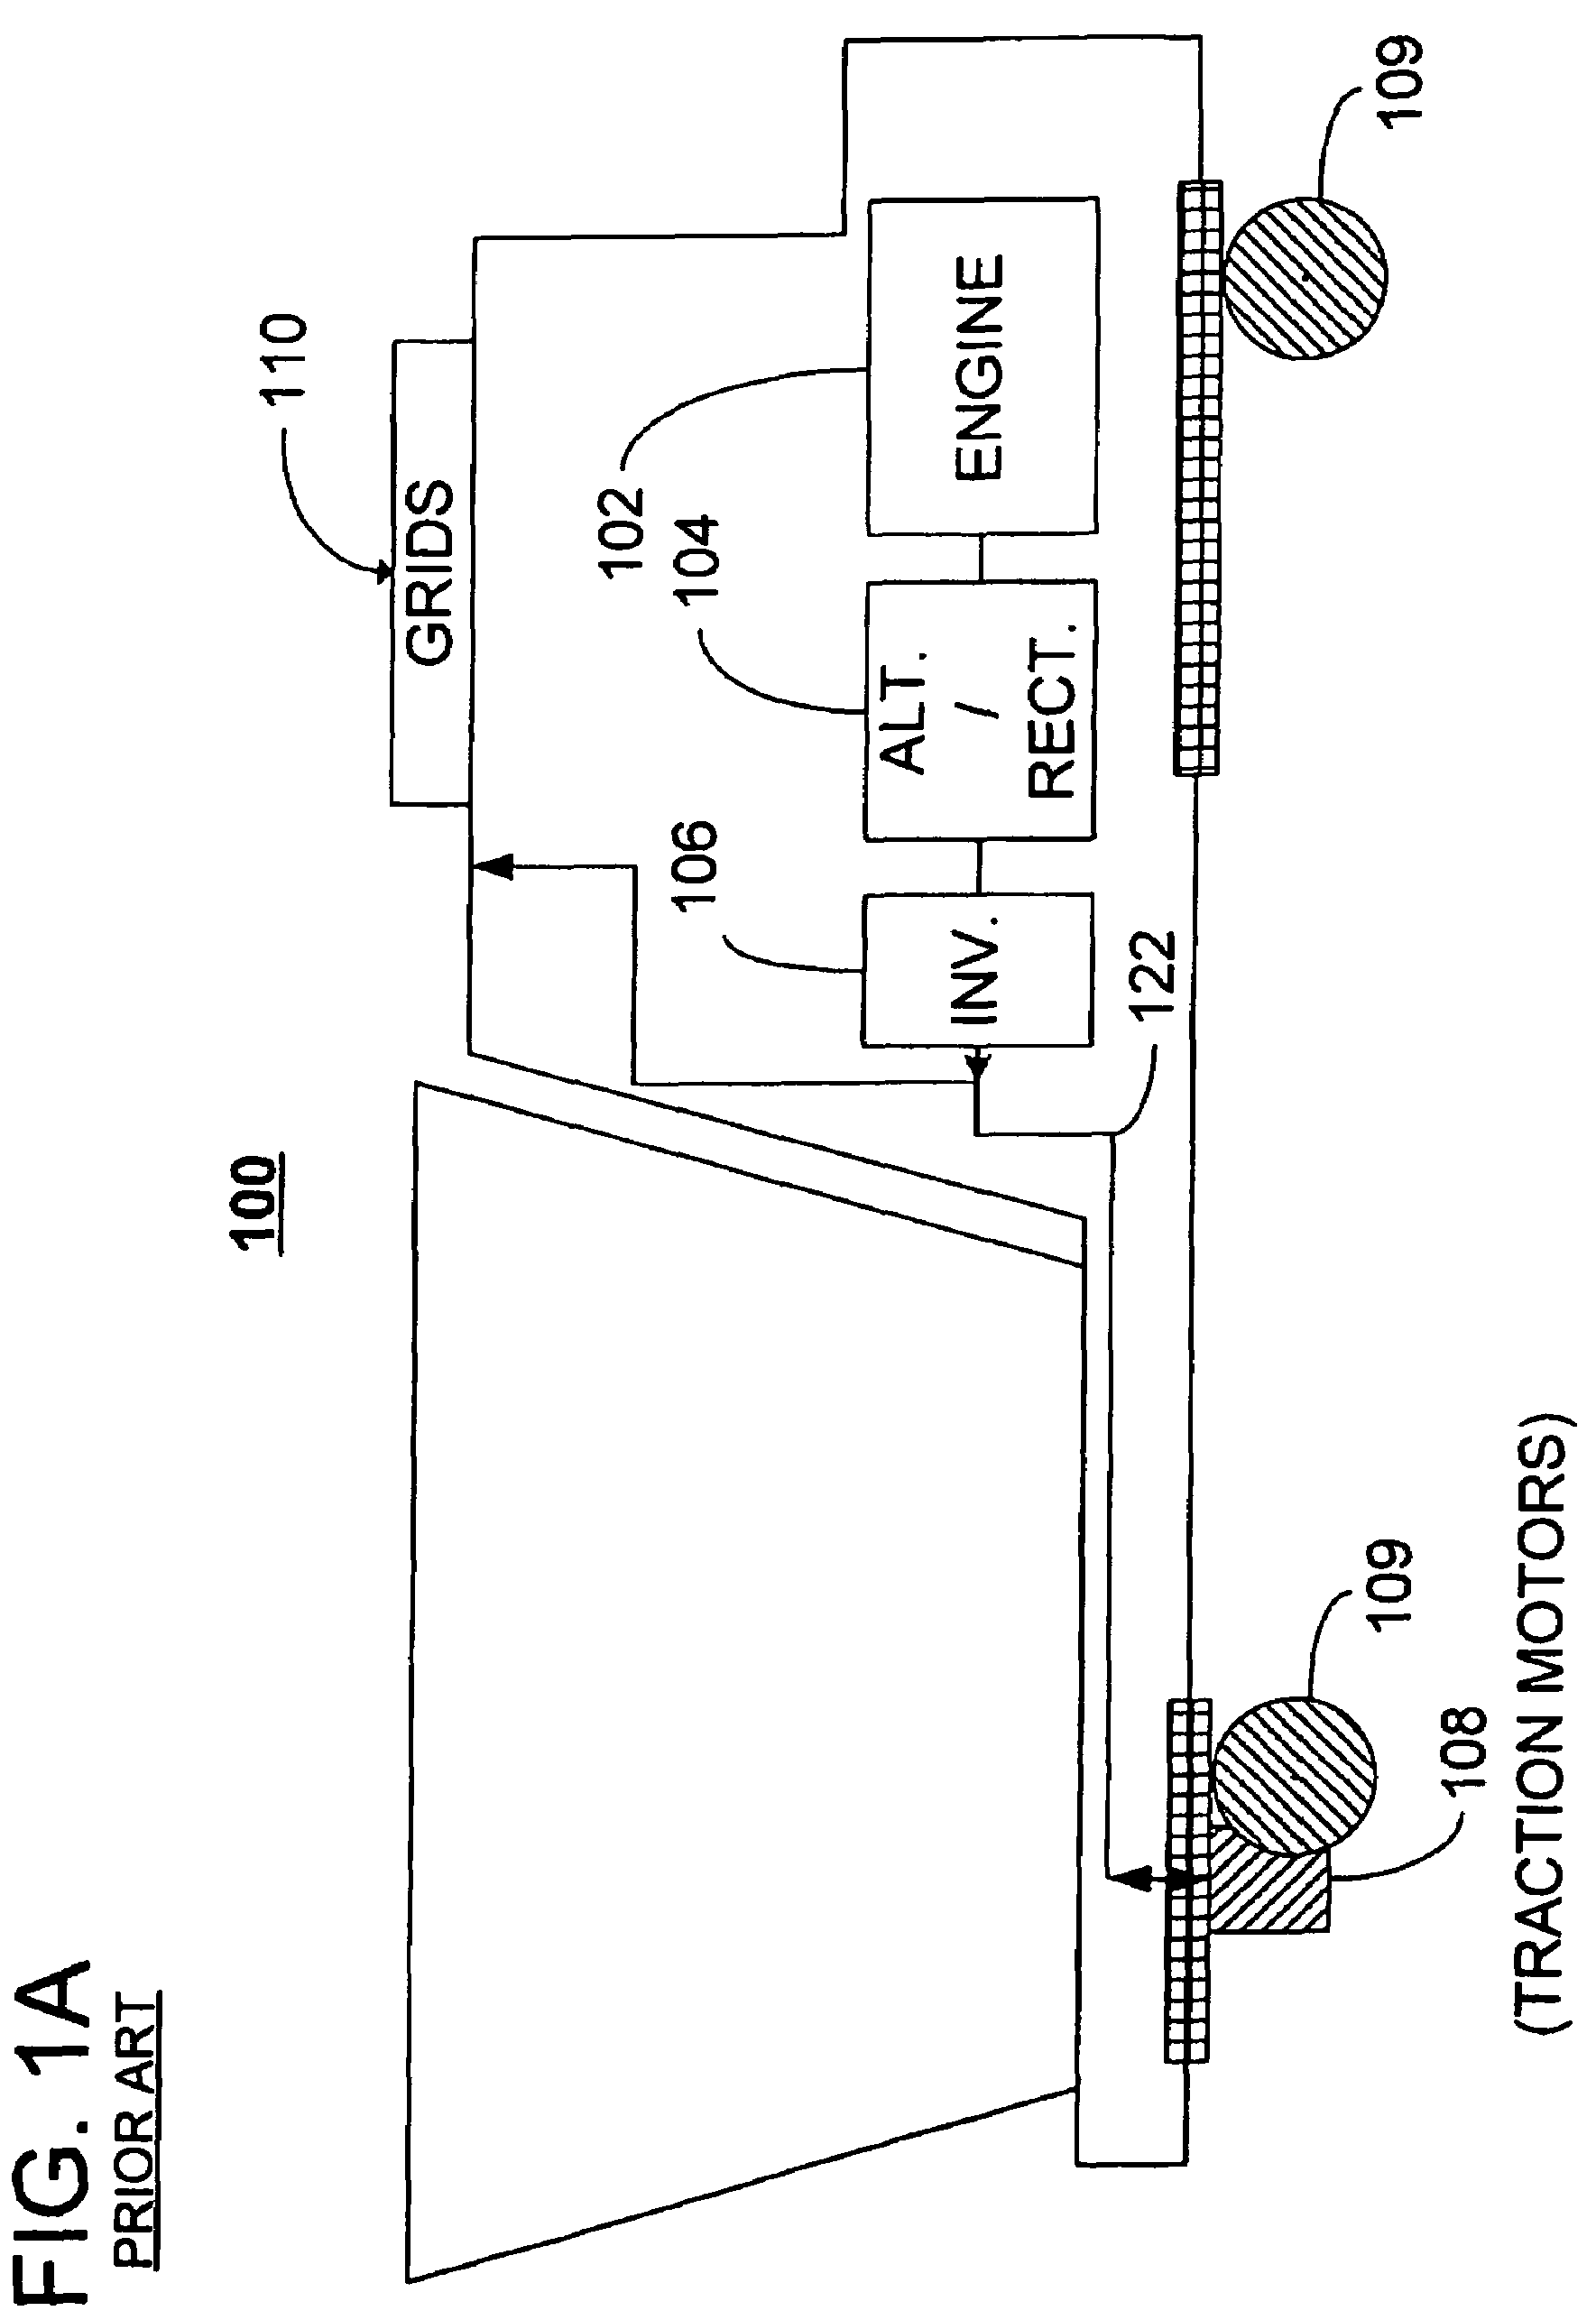 Electrical energy capture system with circuitry for blocking flow of undesirable electrical currents therein